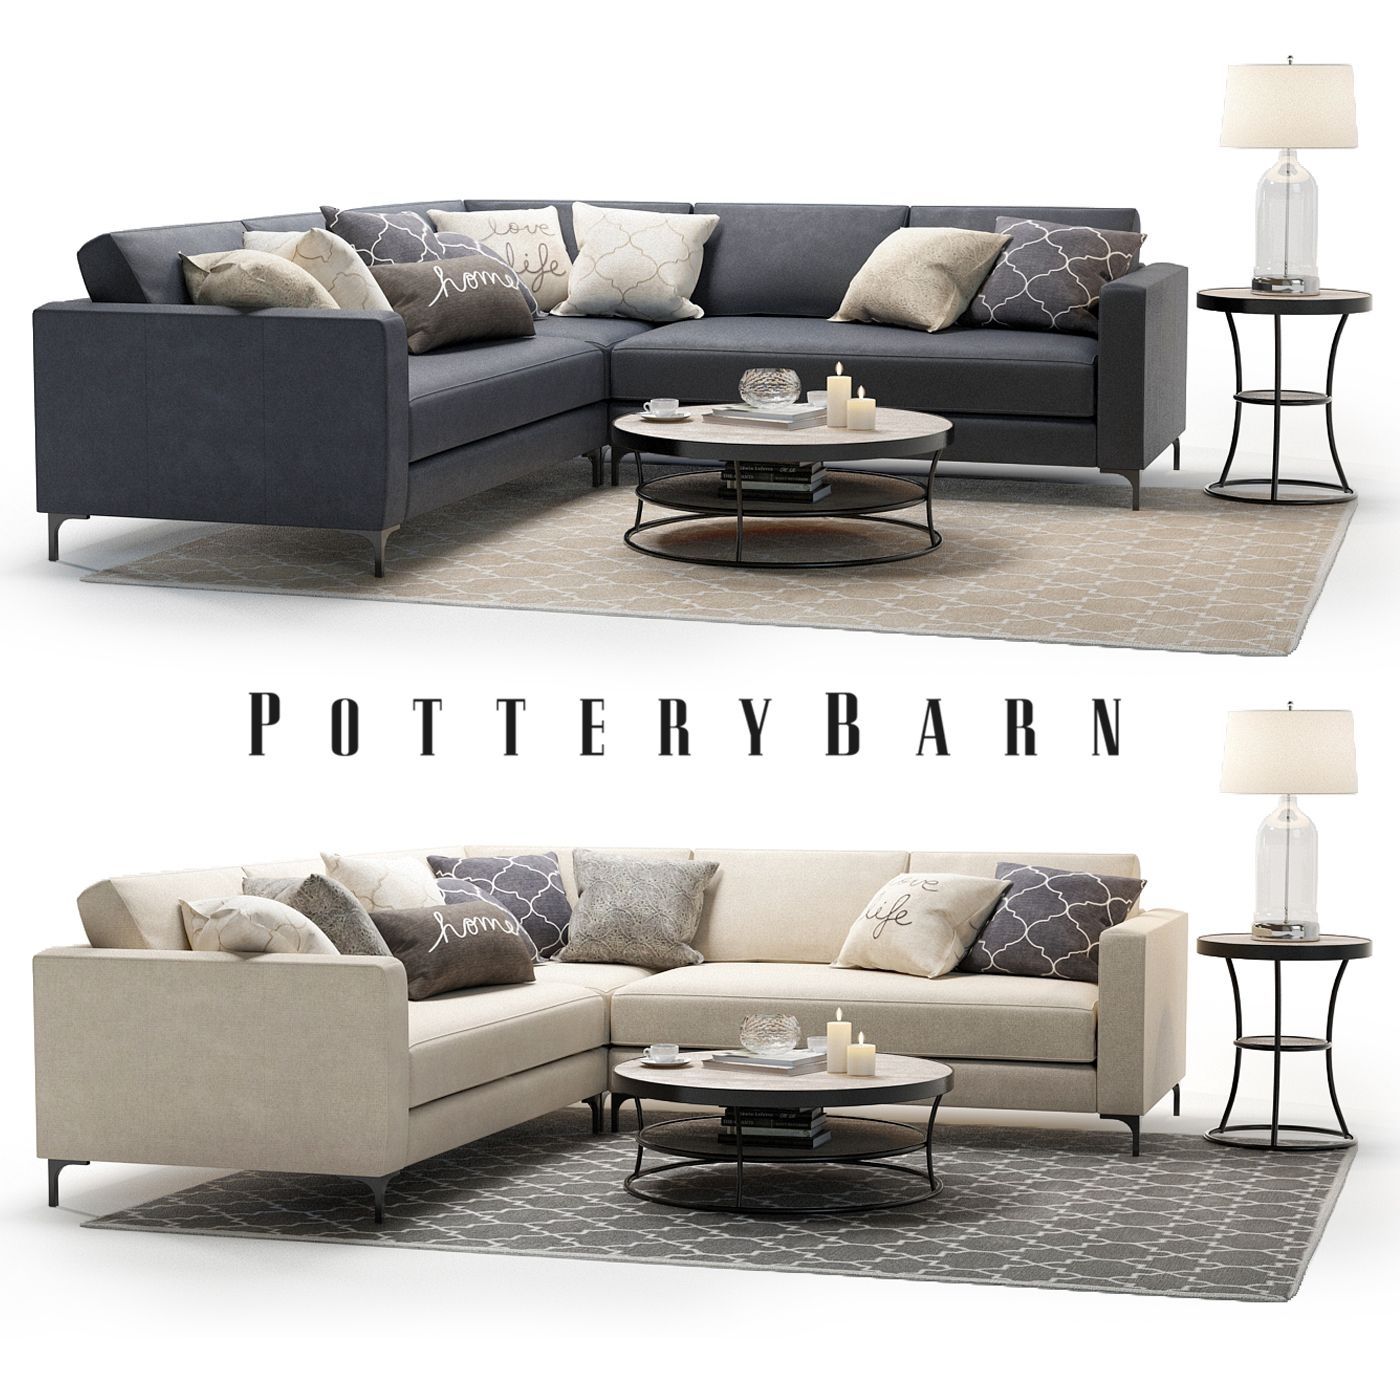 3d Model Pottery Barn Jake Sectional Sofa With Bartlett Intended For Pottery Barn Sectional Sofas 